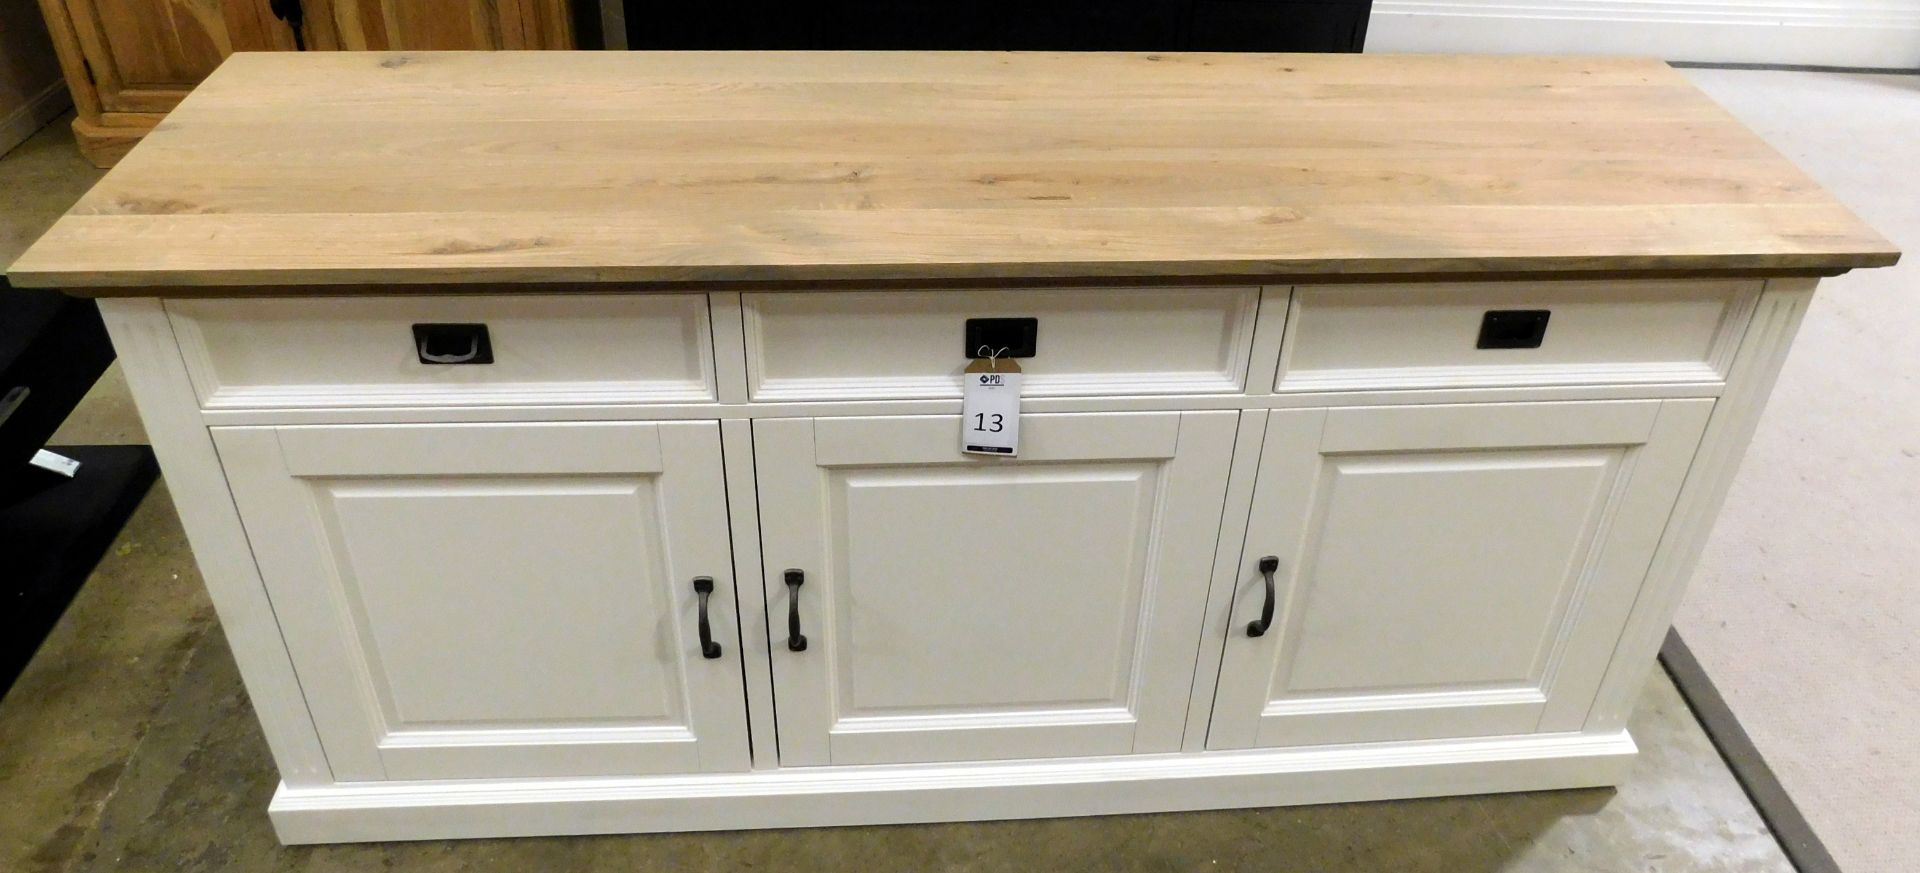 Richmond Interiors Kitchen Dresser Base In Washed White Wood Fitted 3 Drawers Above 3 Cupboards ( - Image 2 of 2